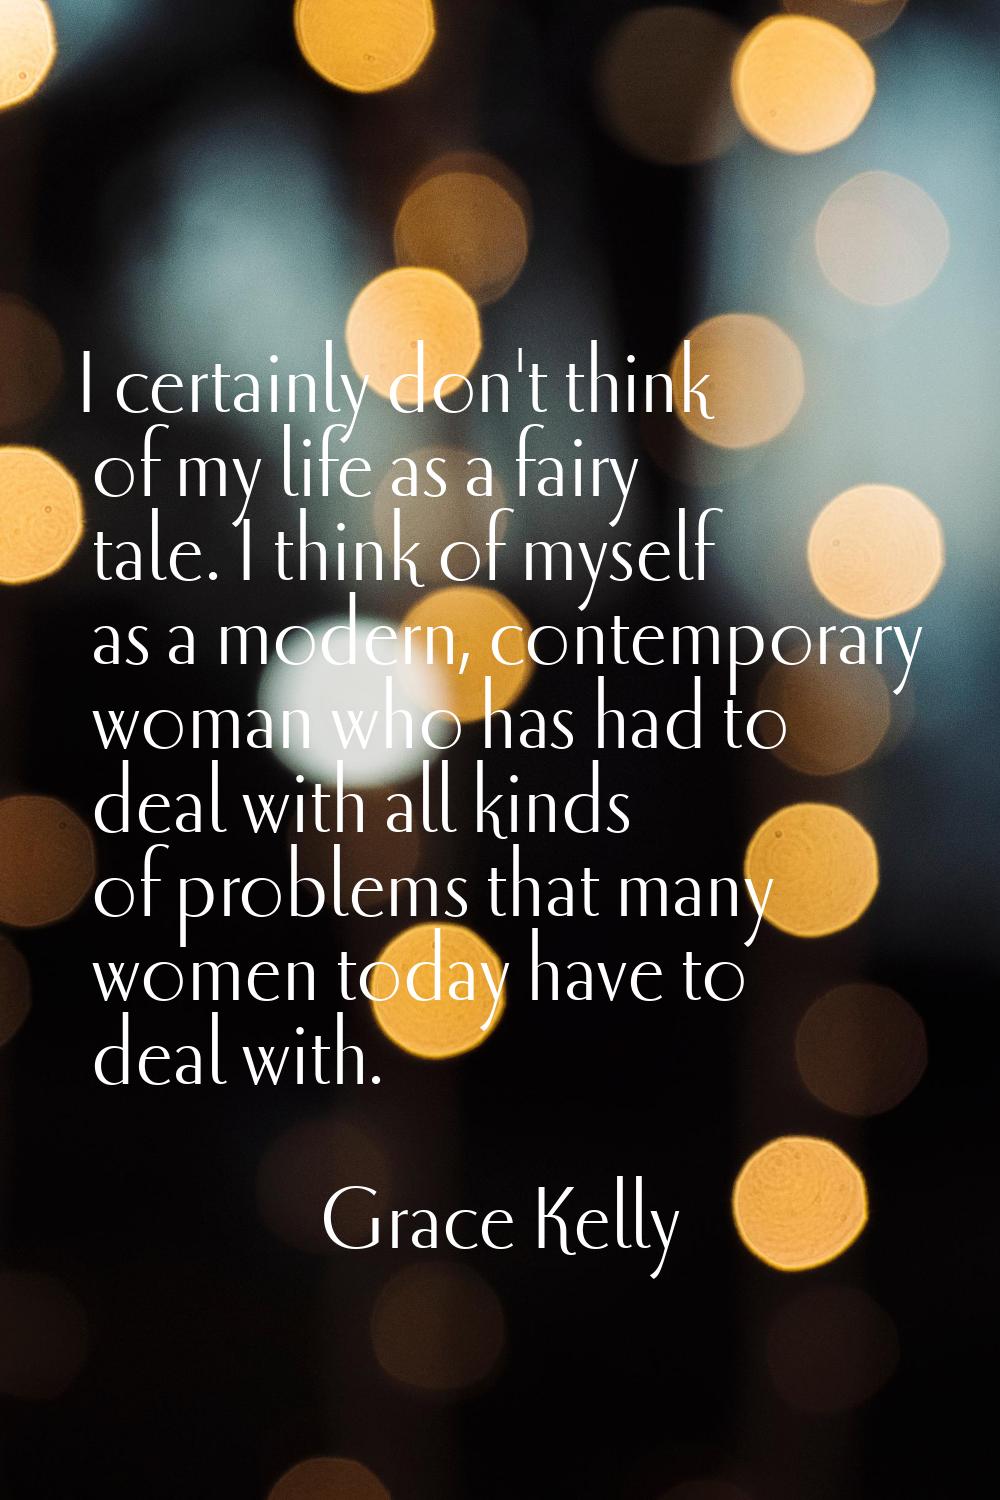 I certainly don't think of my life as a fairy tale. I think of myself as a modern, contemporary wom